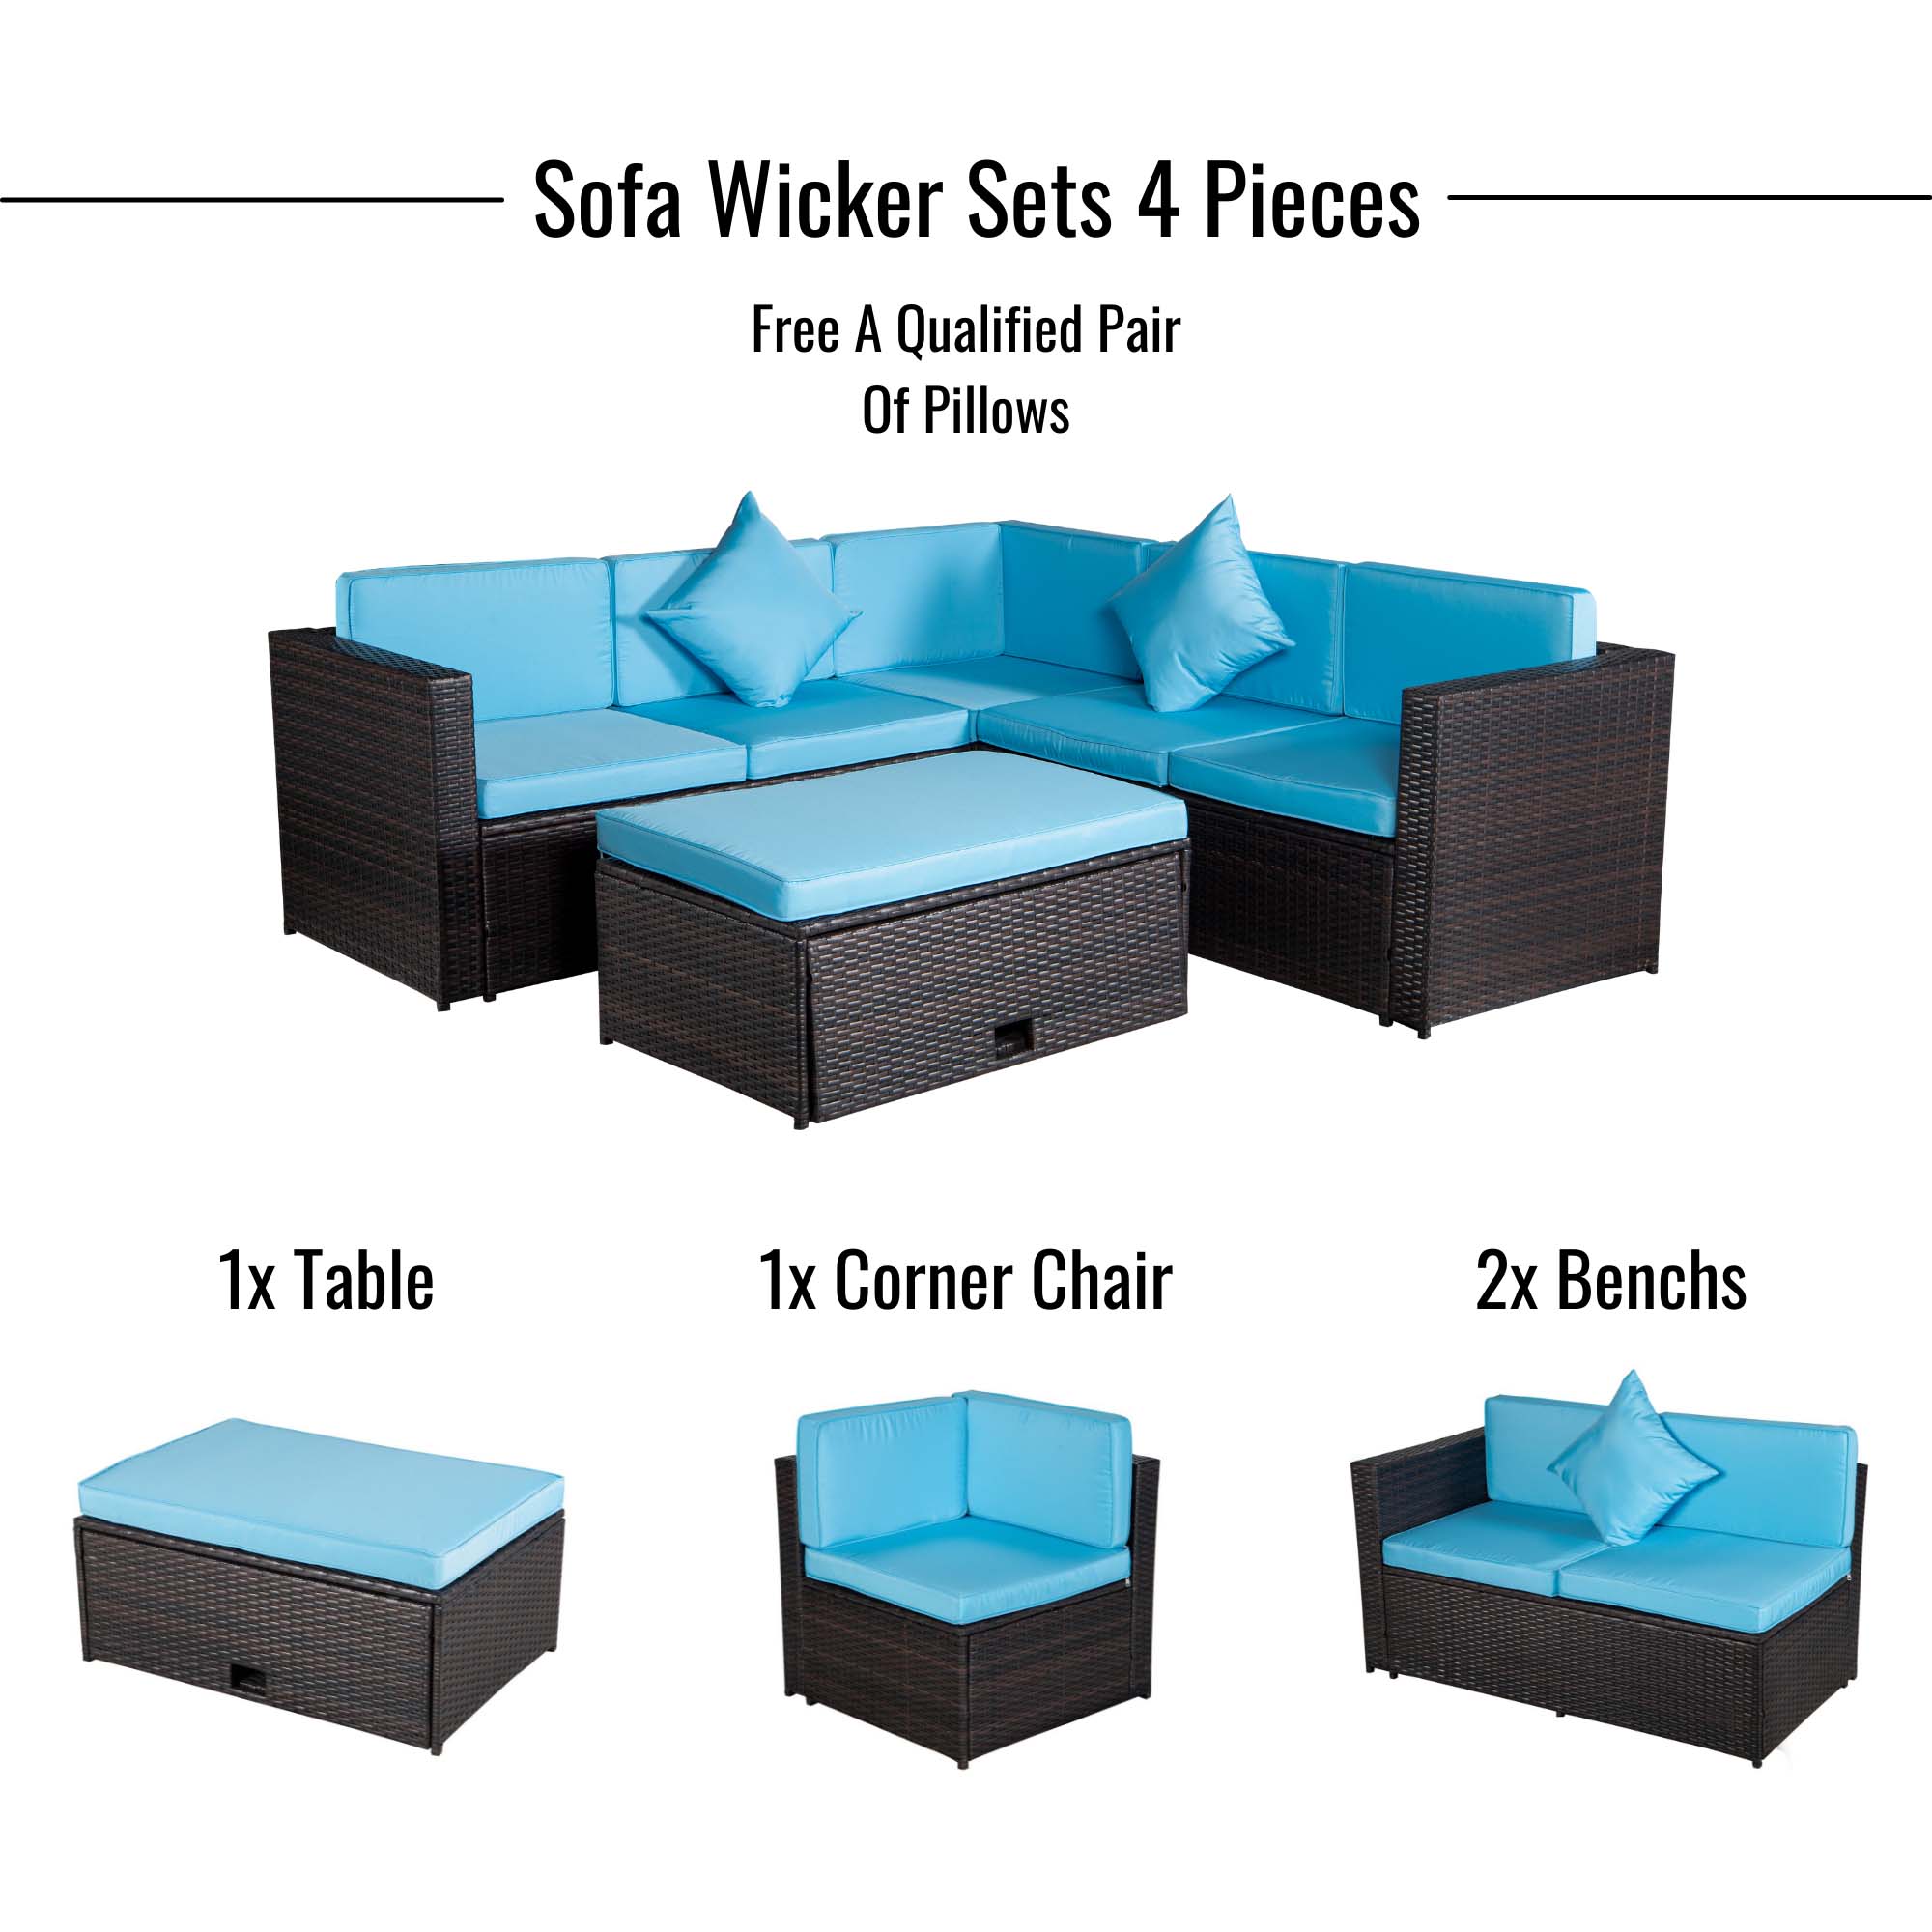 4 Pieces Patio Conversation Sets on Clearance, 4 Pieces Outdoor Wicker Patio Furniture Set with Seat Cushions & Tempered Glass Dining Table, Wicker Sofa Sets for Porch Poolside Backyard Garden, S8177 - image 4 of 10